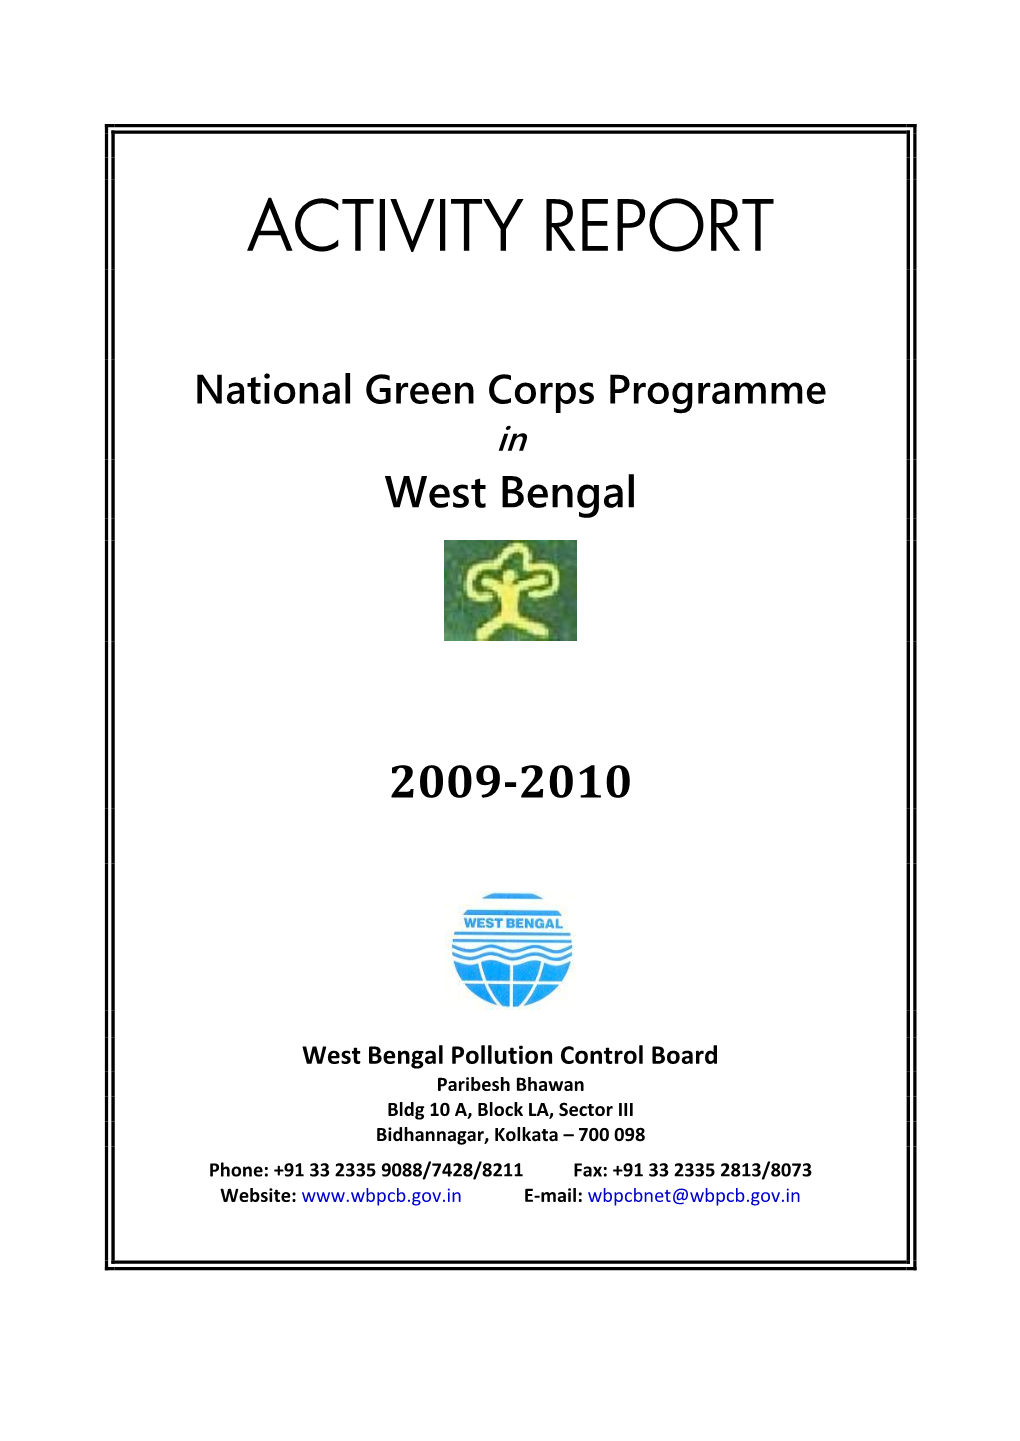 To View the NGC Activity Report